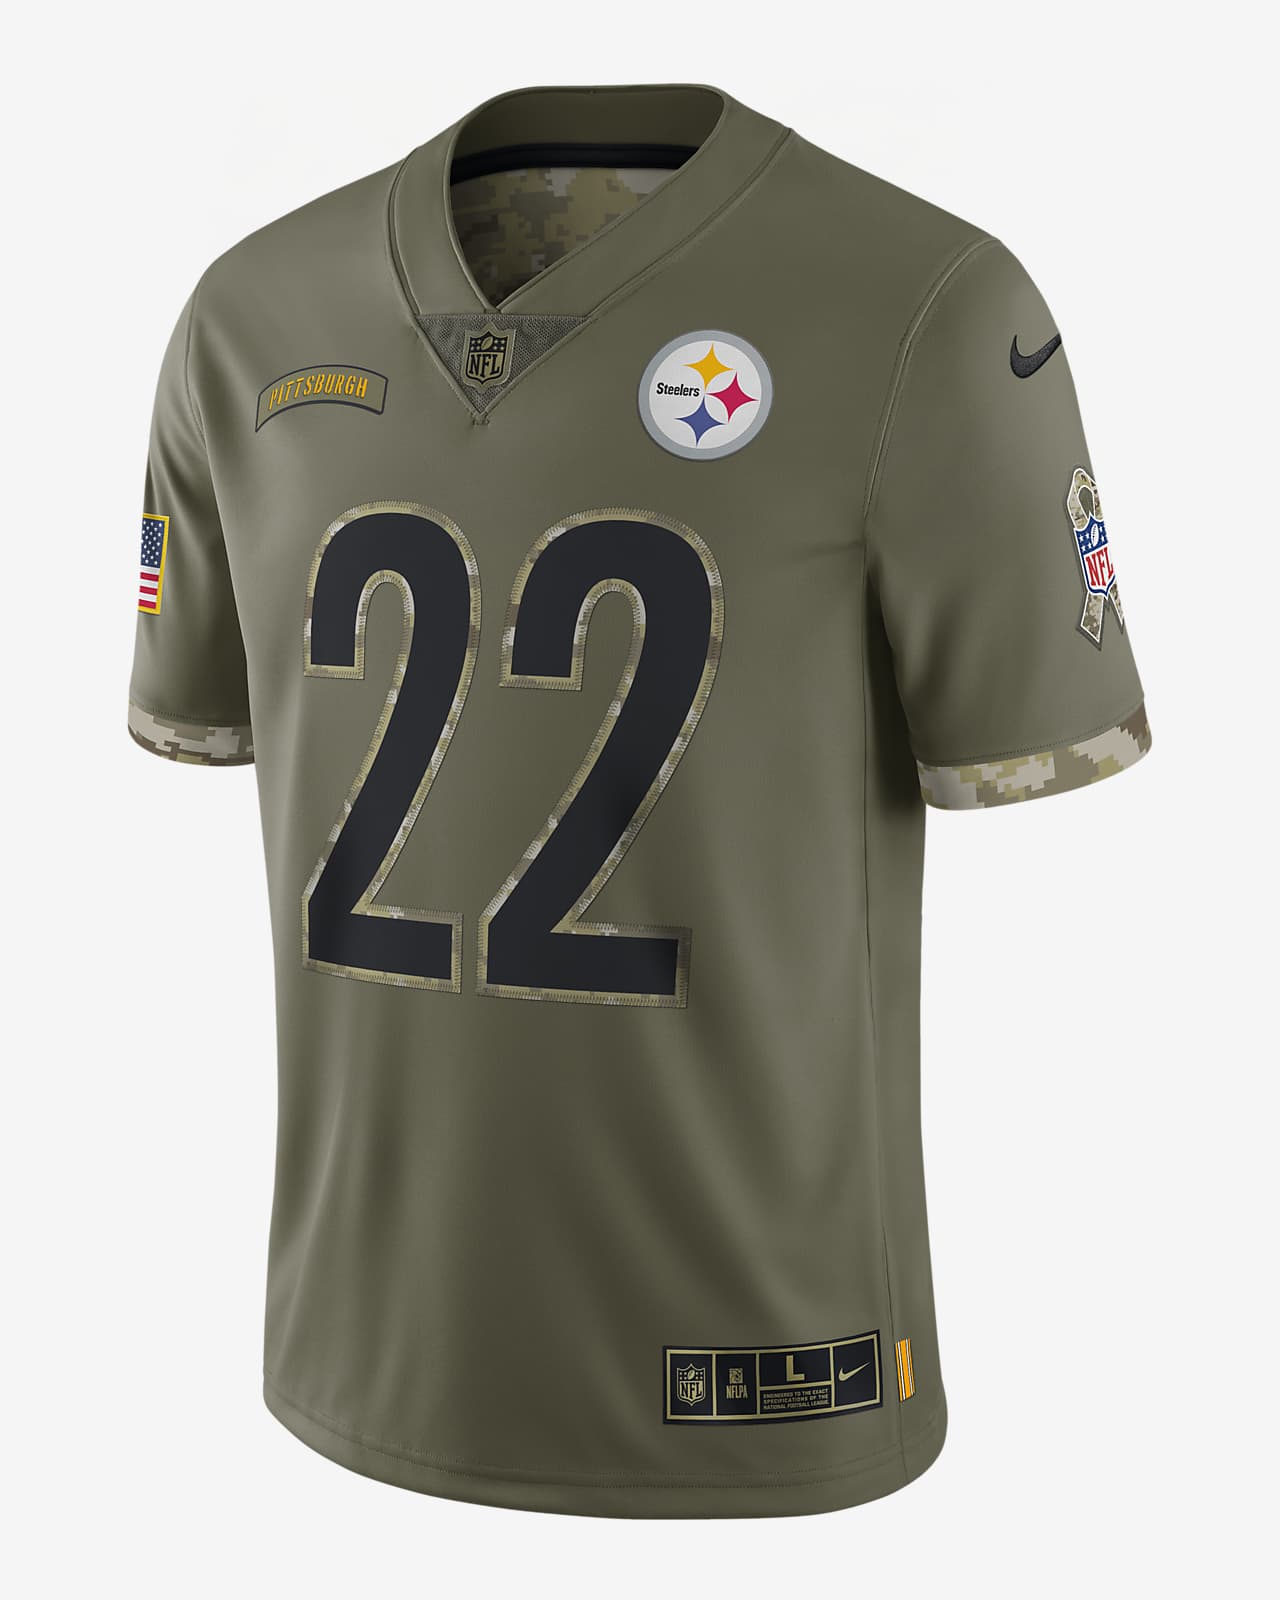 steelers jersey salute to service